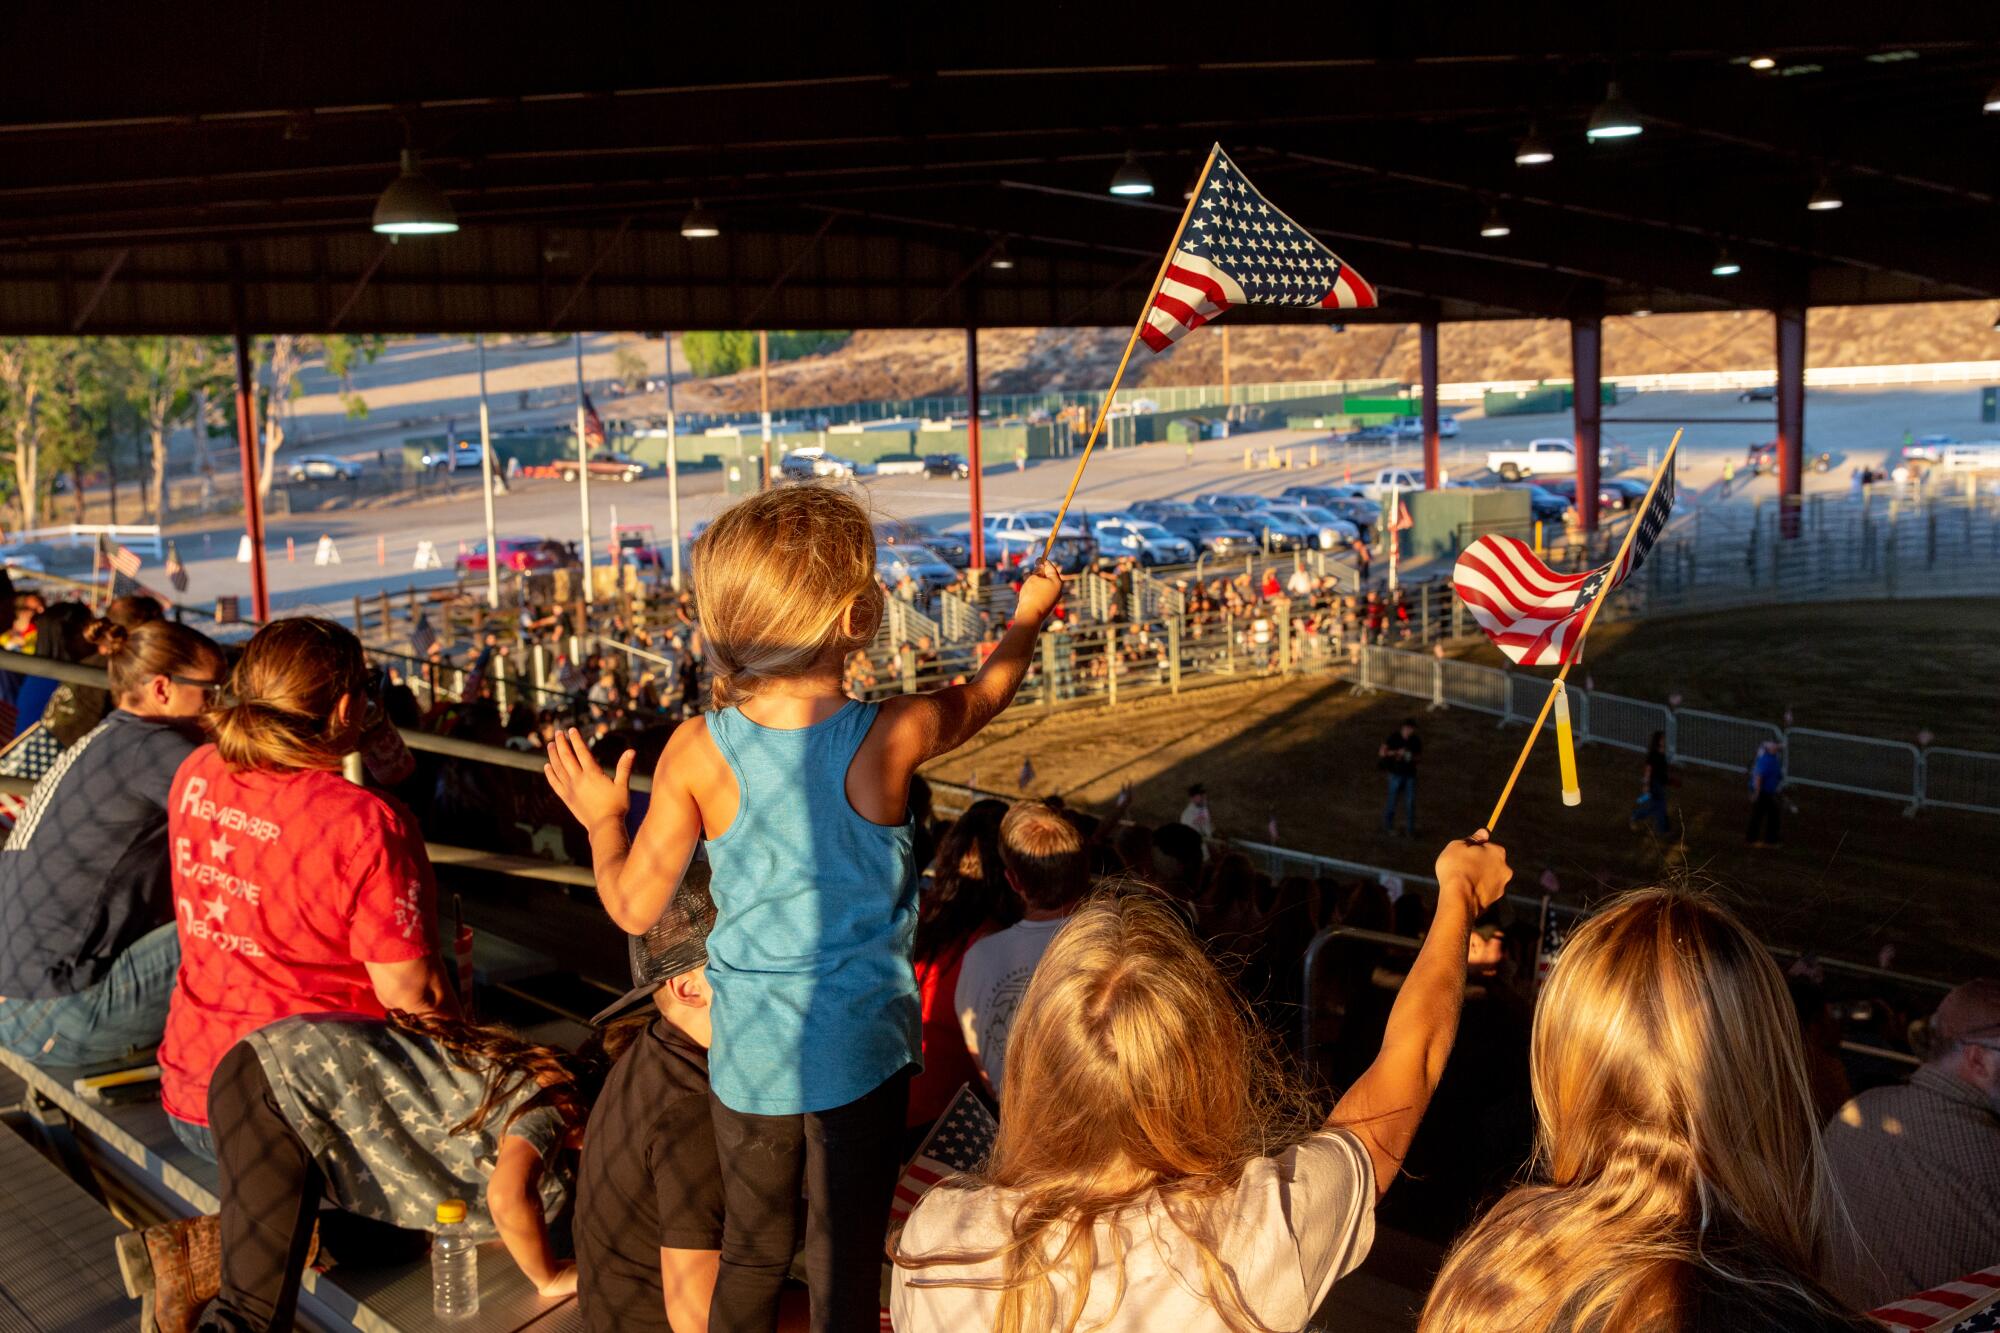 A child waves a flag with her siblings at an equestrian center